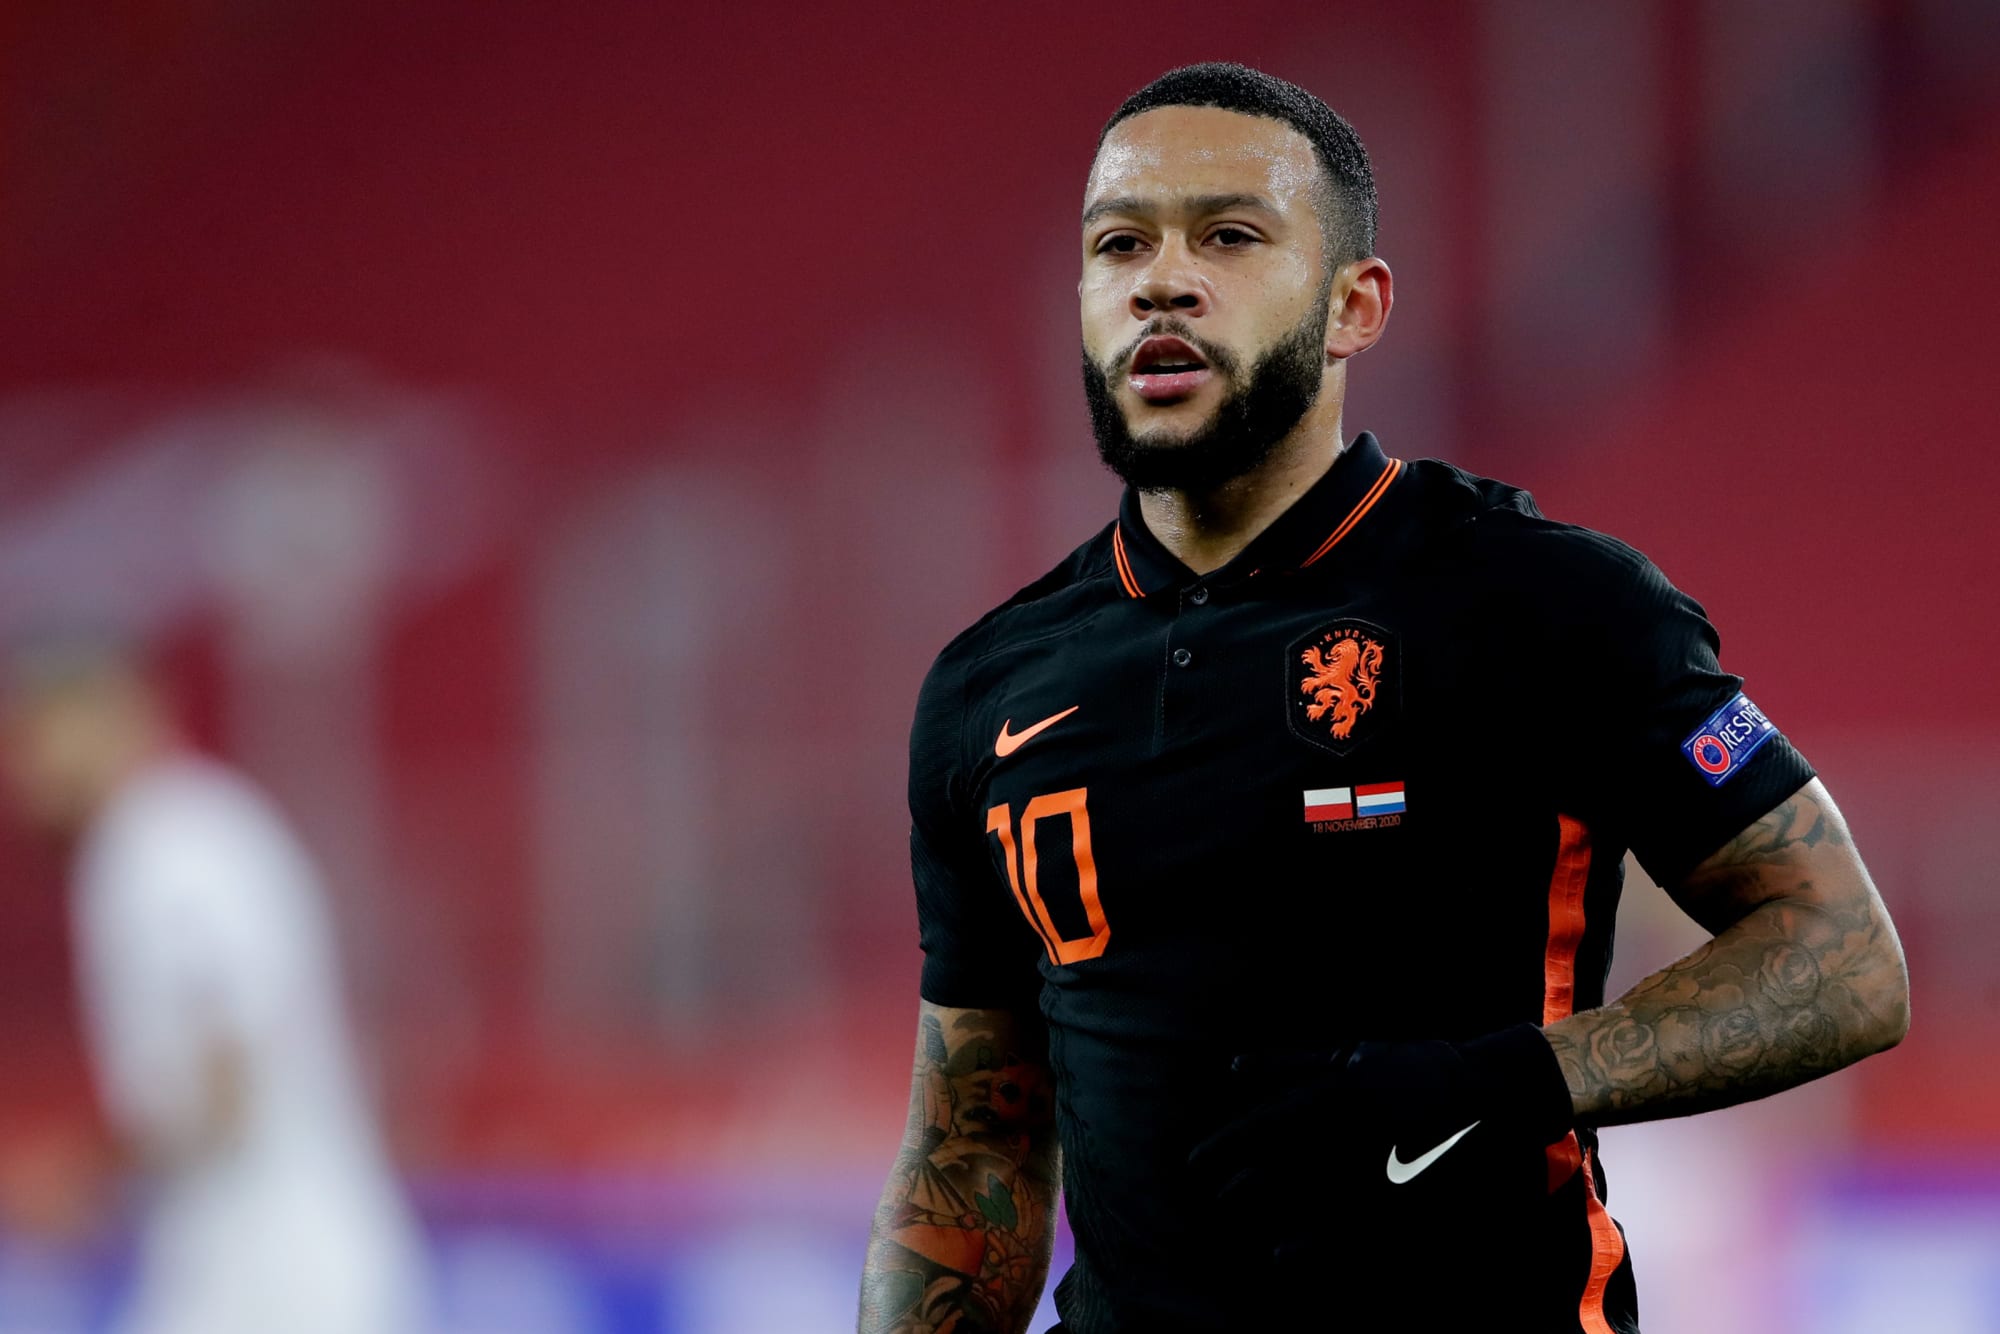 Using Statistics to Determine Memphis Depay's Role at Barcelona